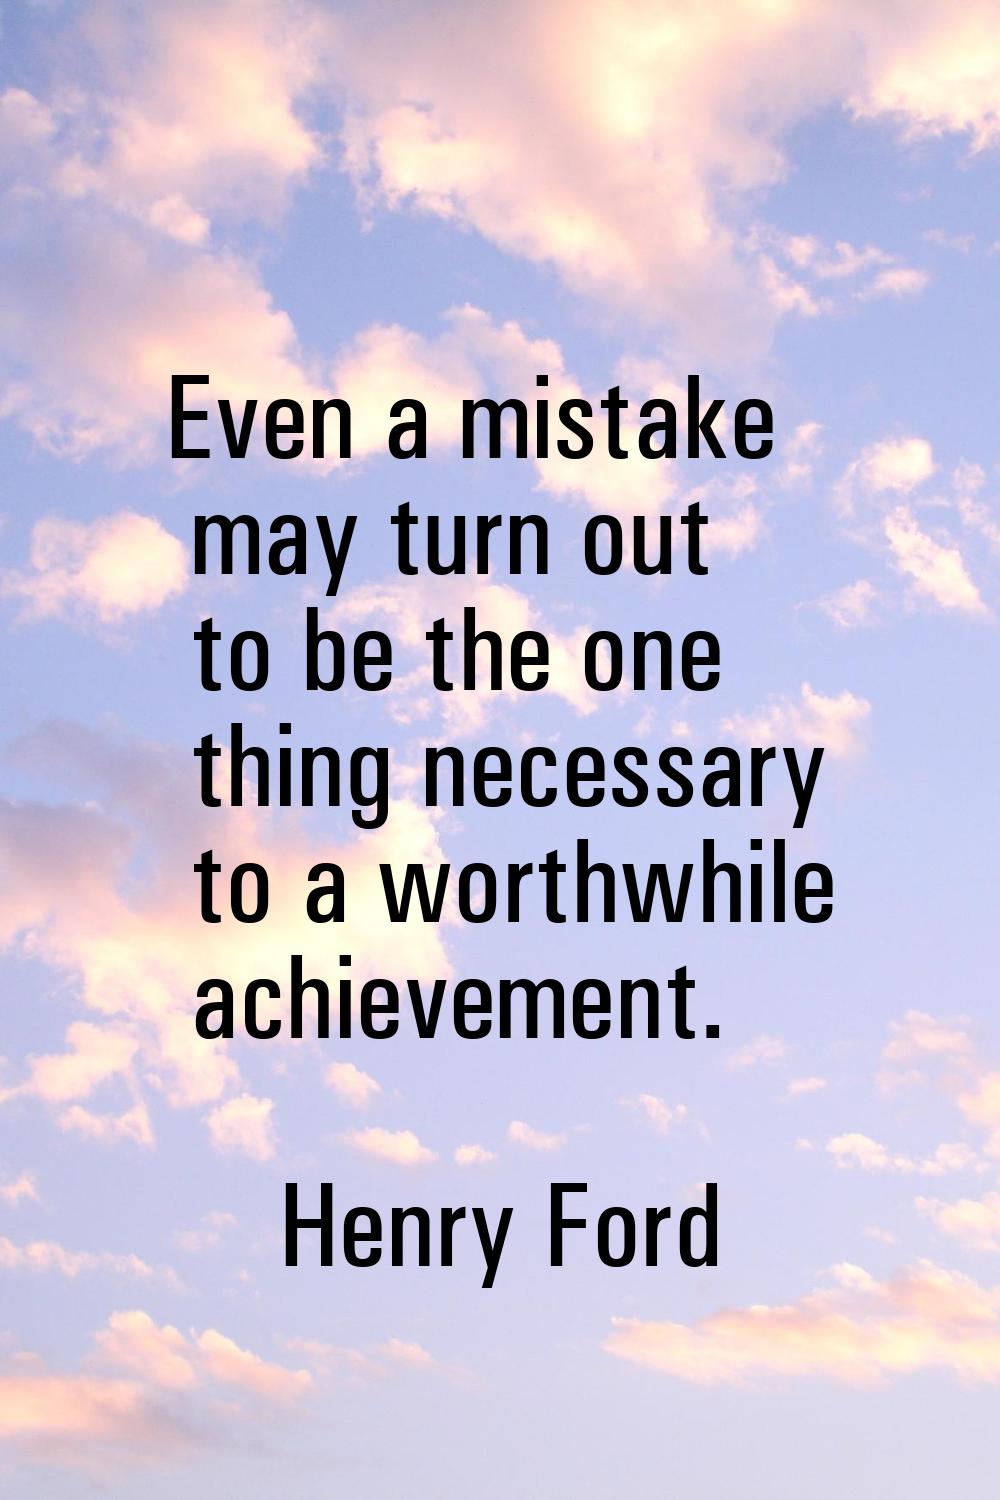 Even a mistake may turn out to be the one thing necessary to a worthwhile achievement.